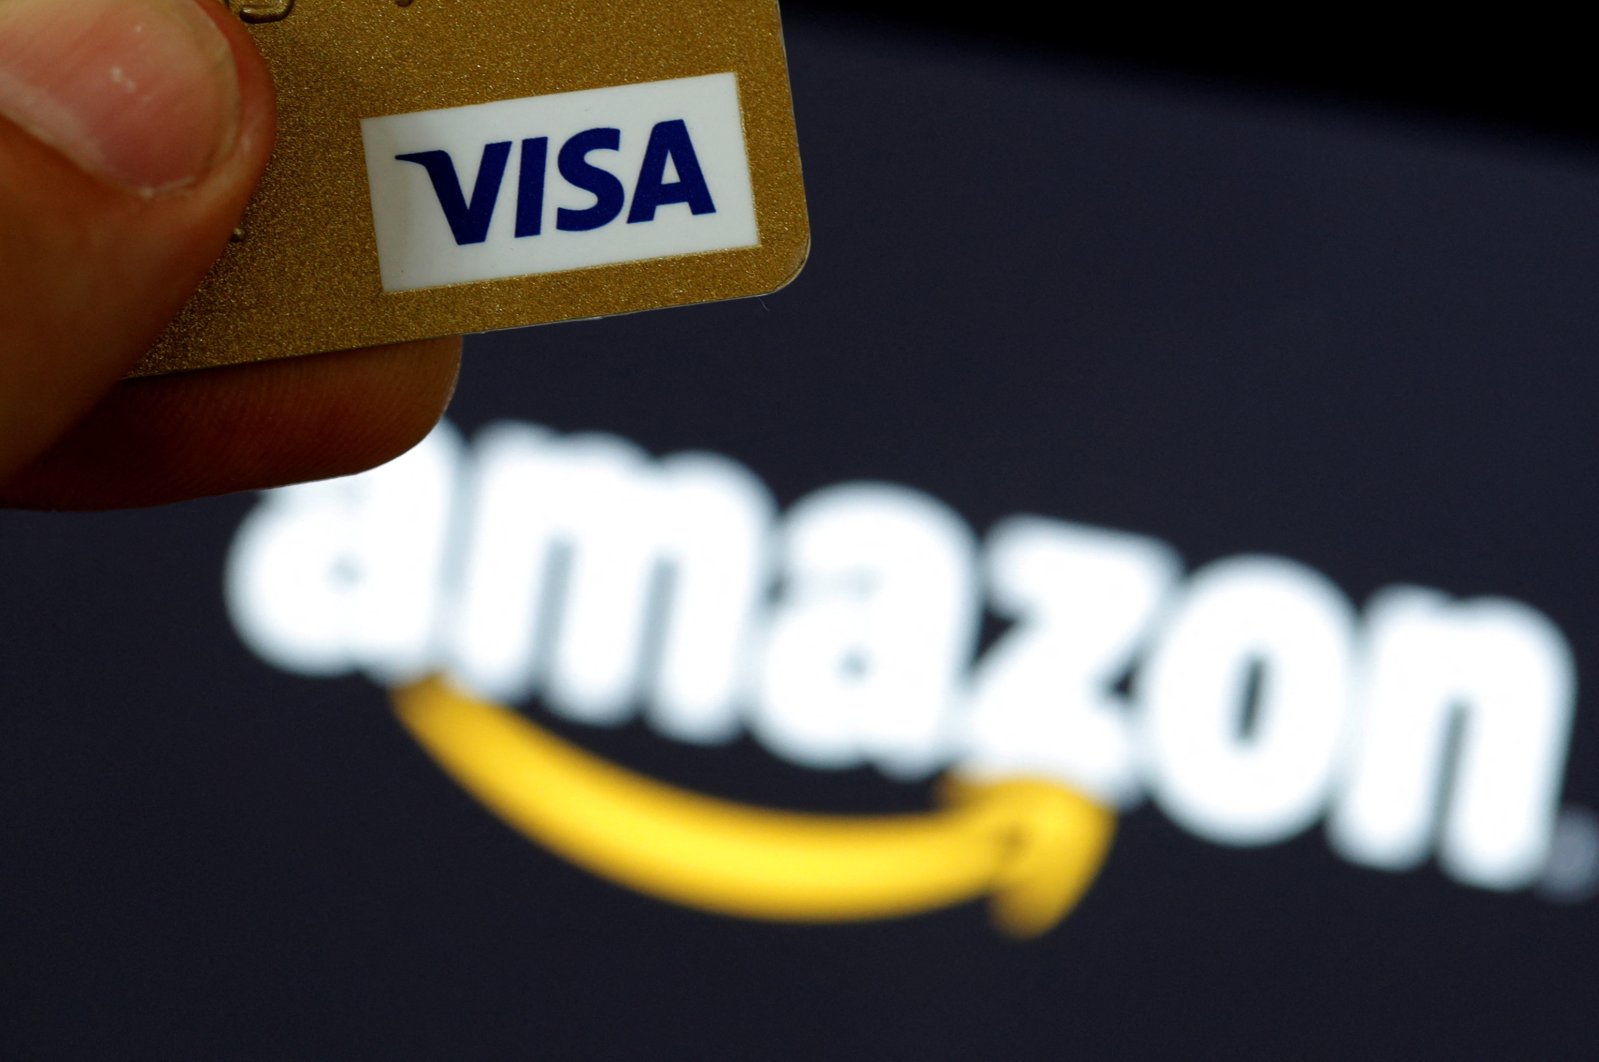 A visa credit card is held in front of an Amazon logo in this picture illustration, Sept. 6, 2017. (Reuters Photo)